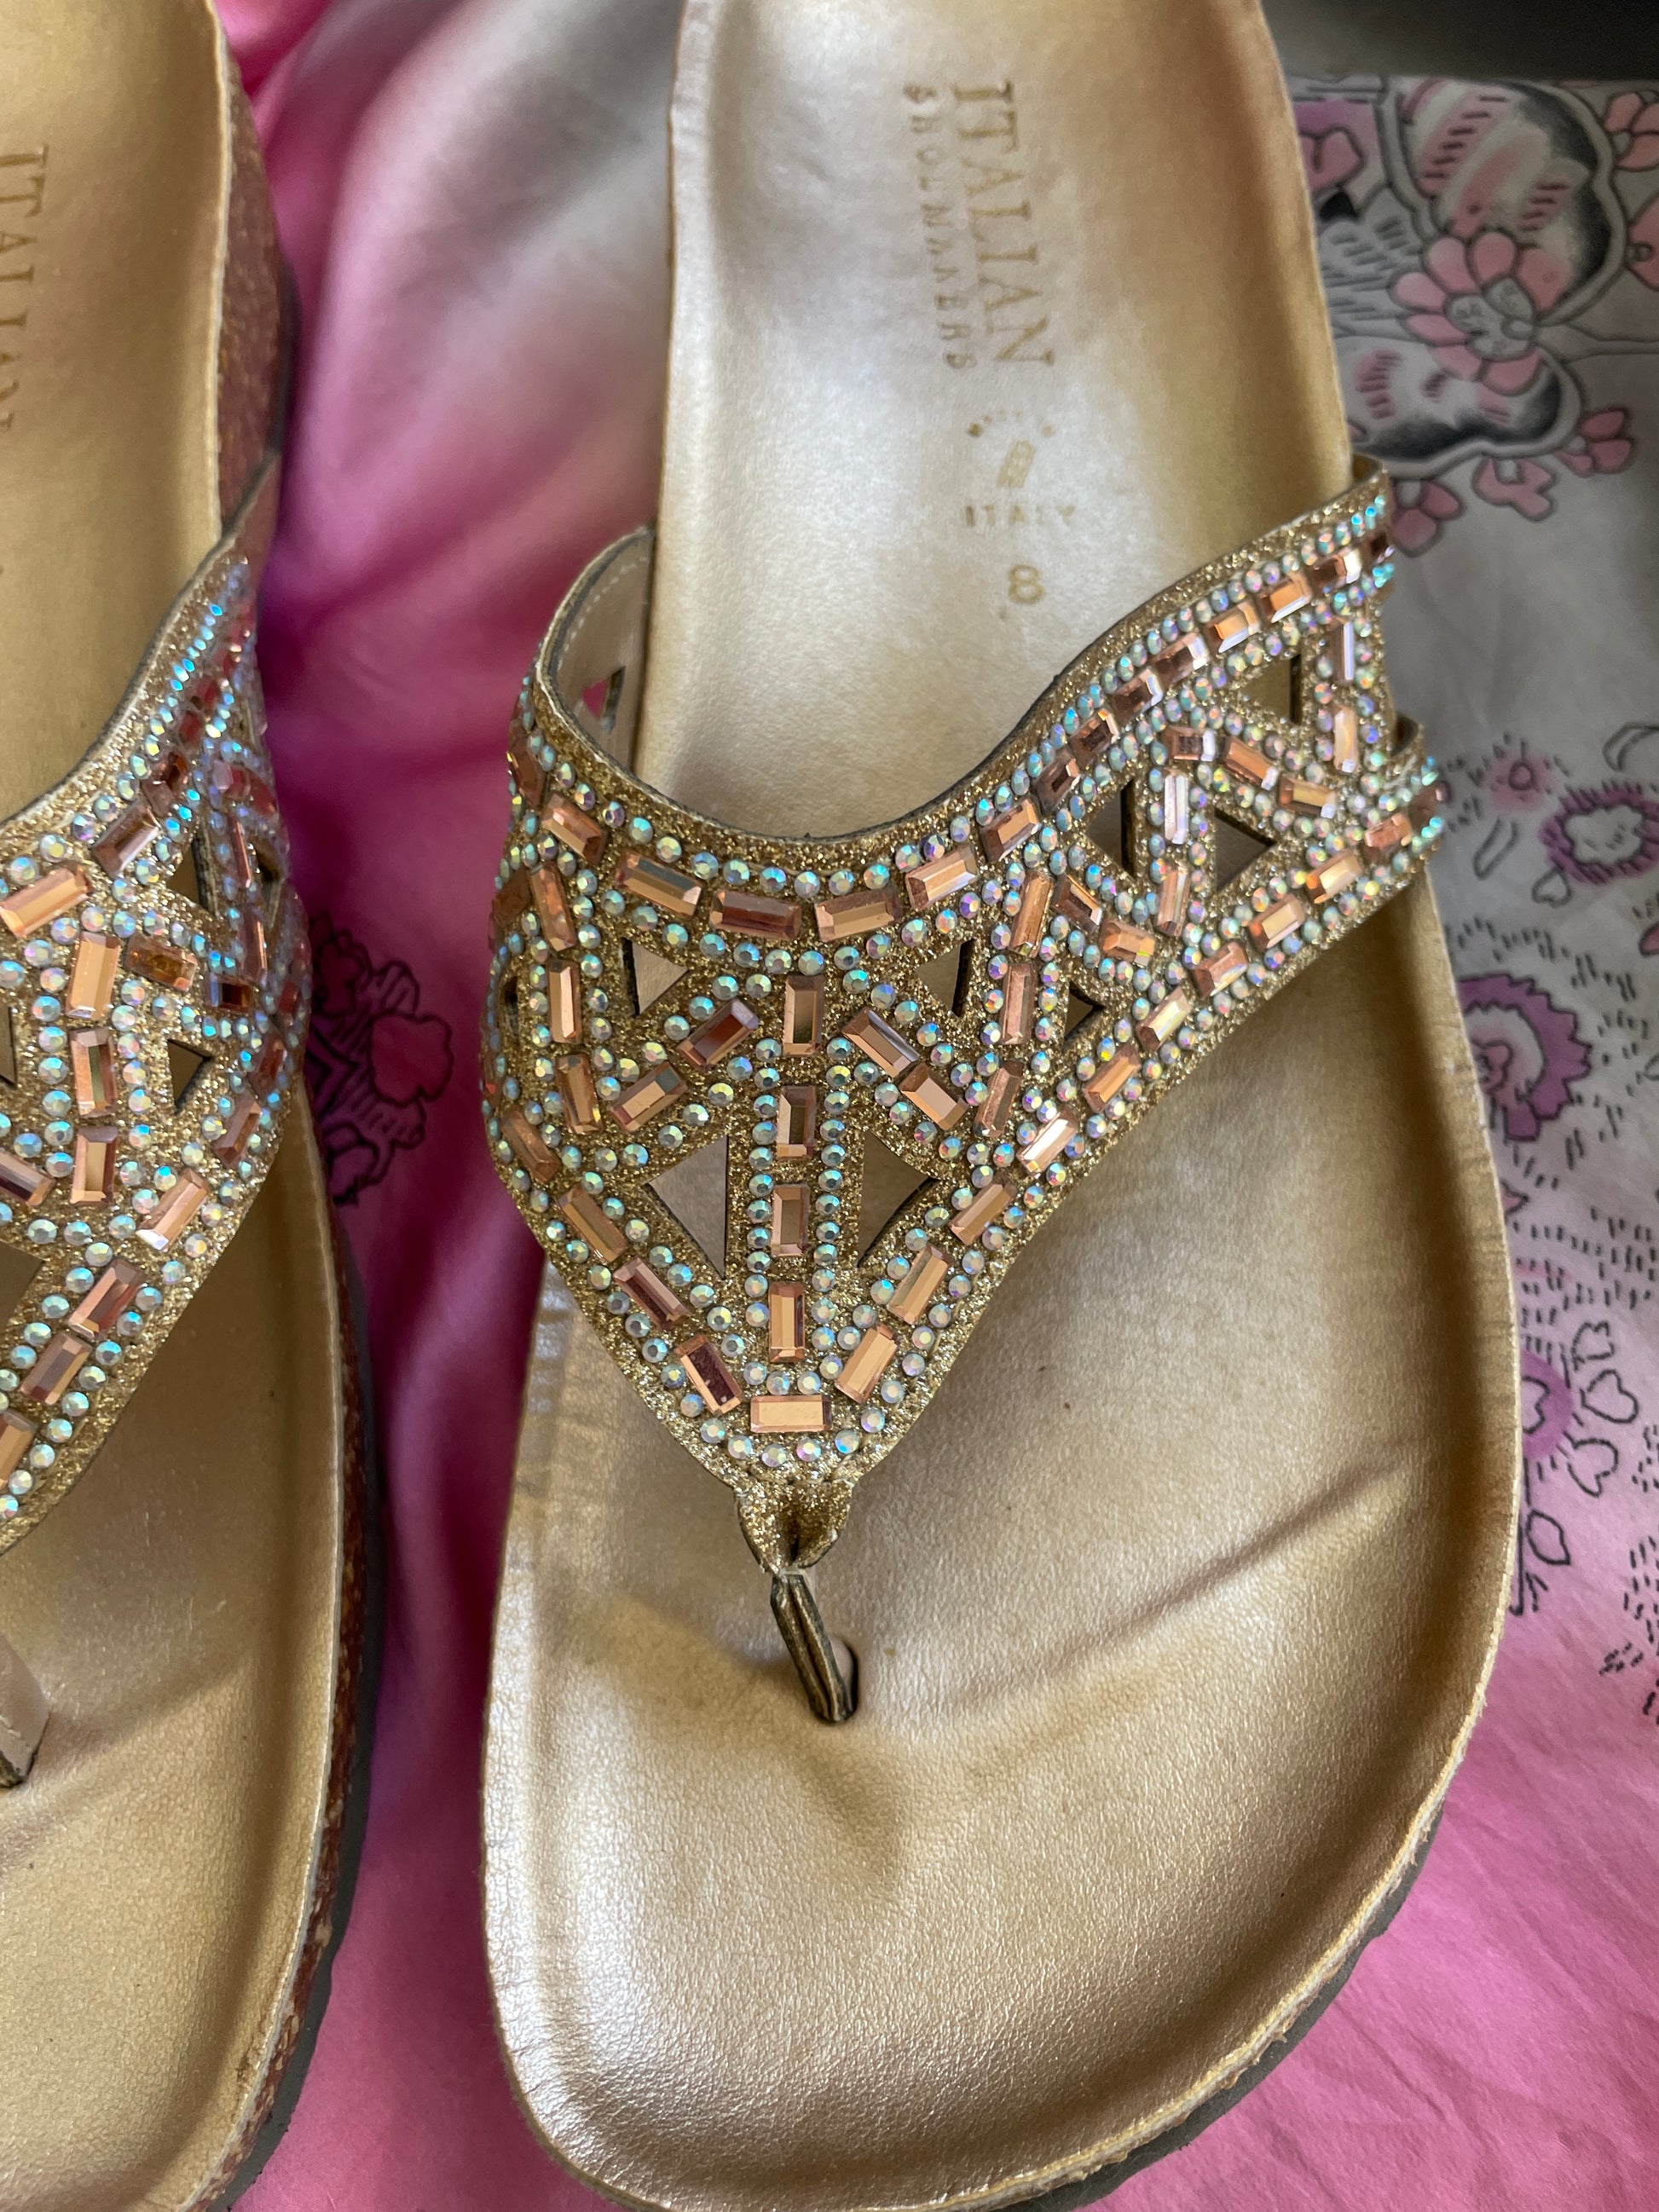  Italian Shoemakers Made in Italy Gold Sparkling Beaded Sandles 8